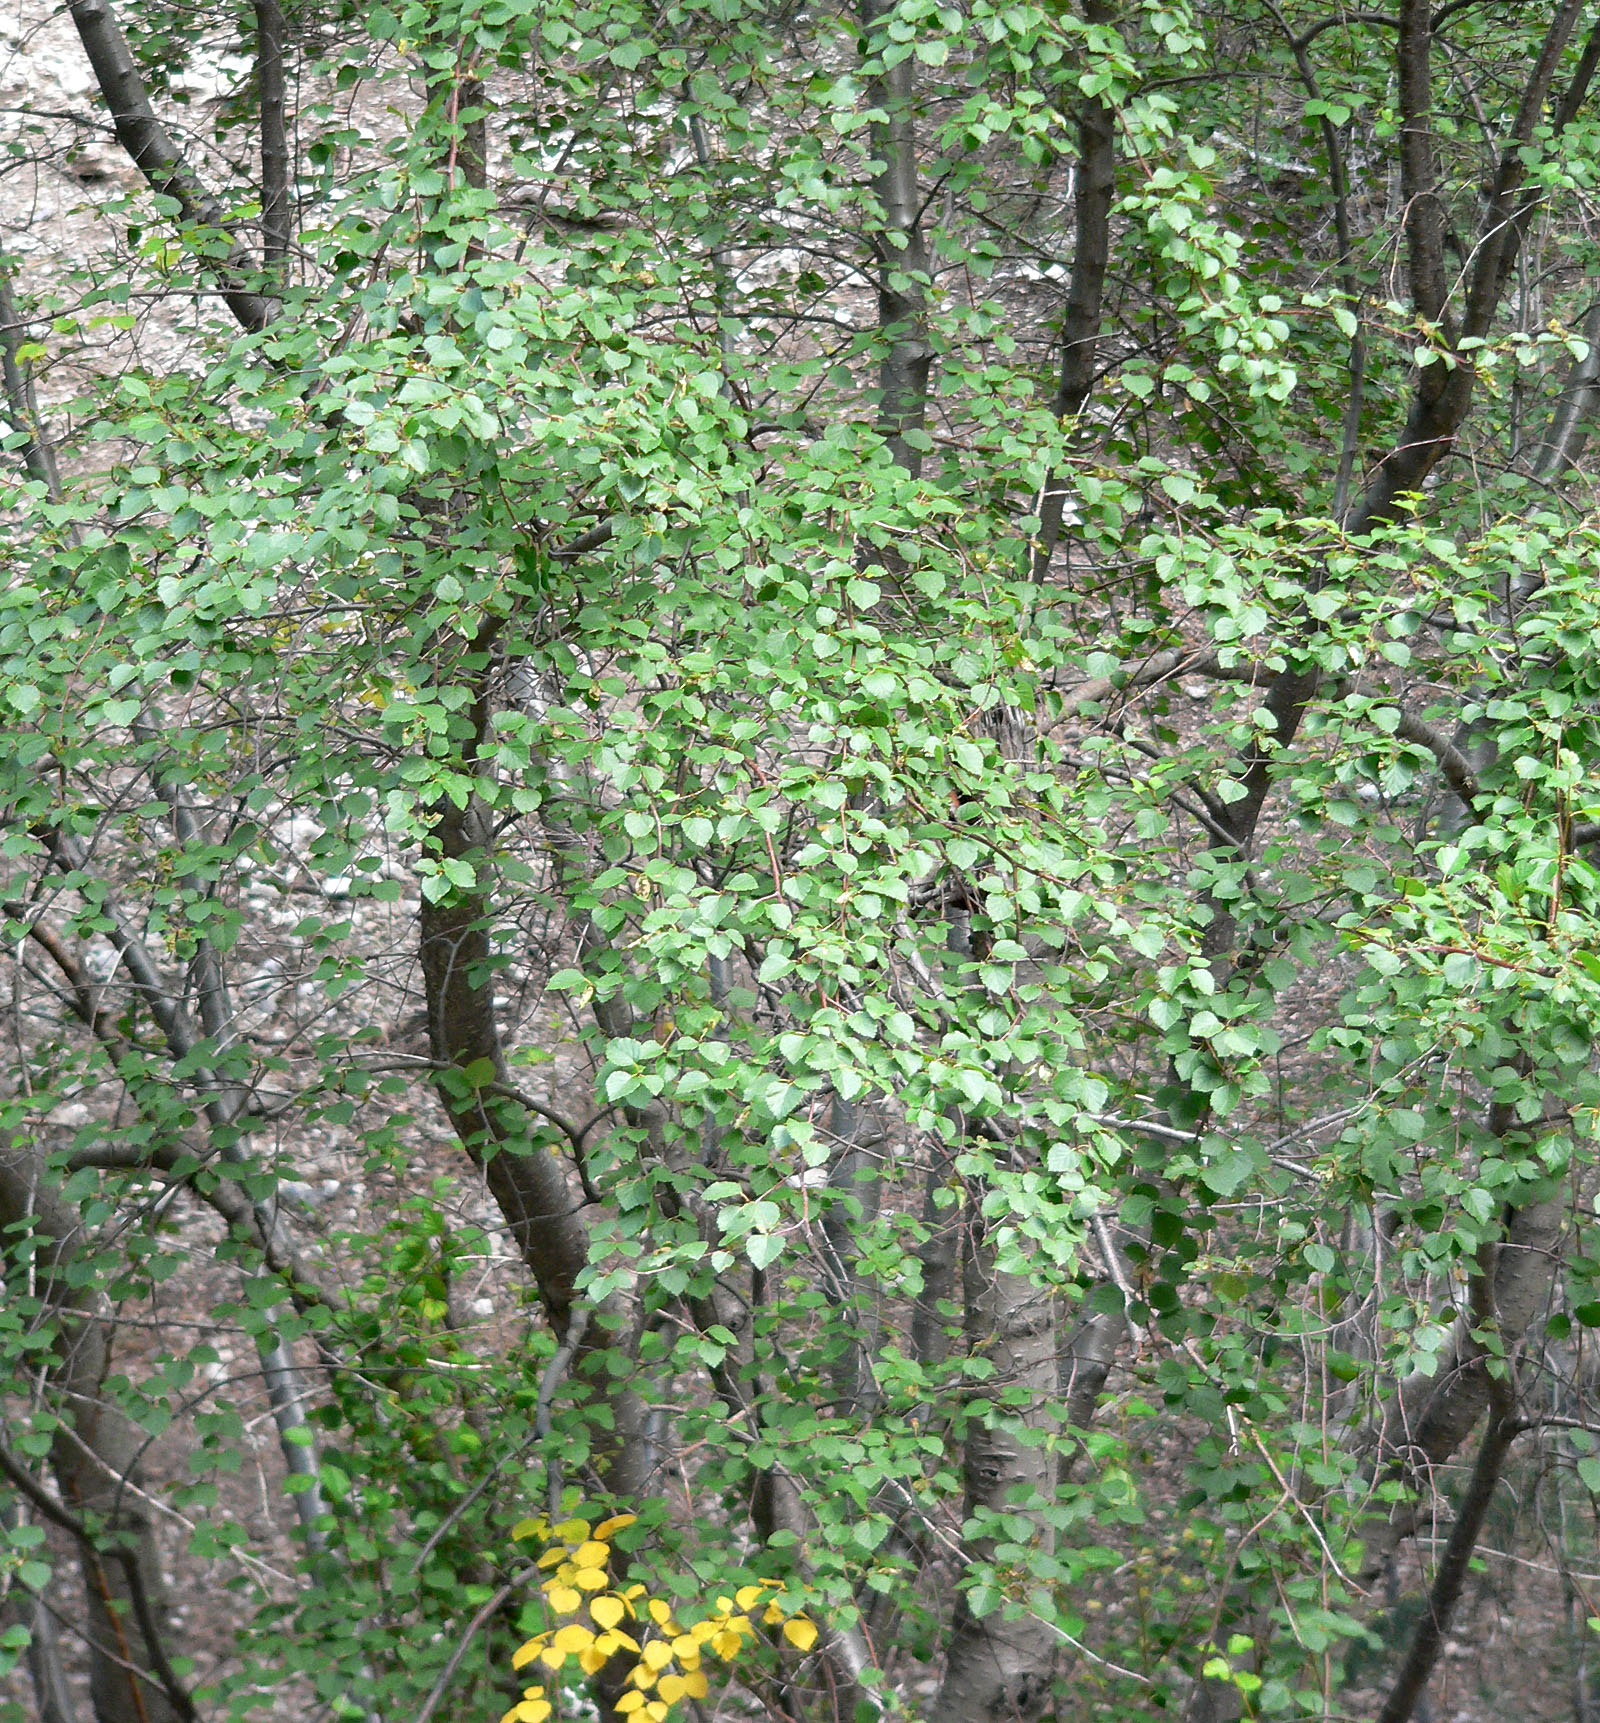 Growth habit, usually with multiple trunks